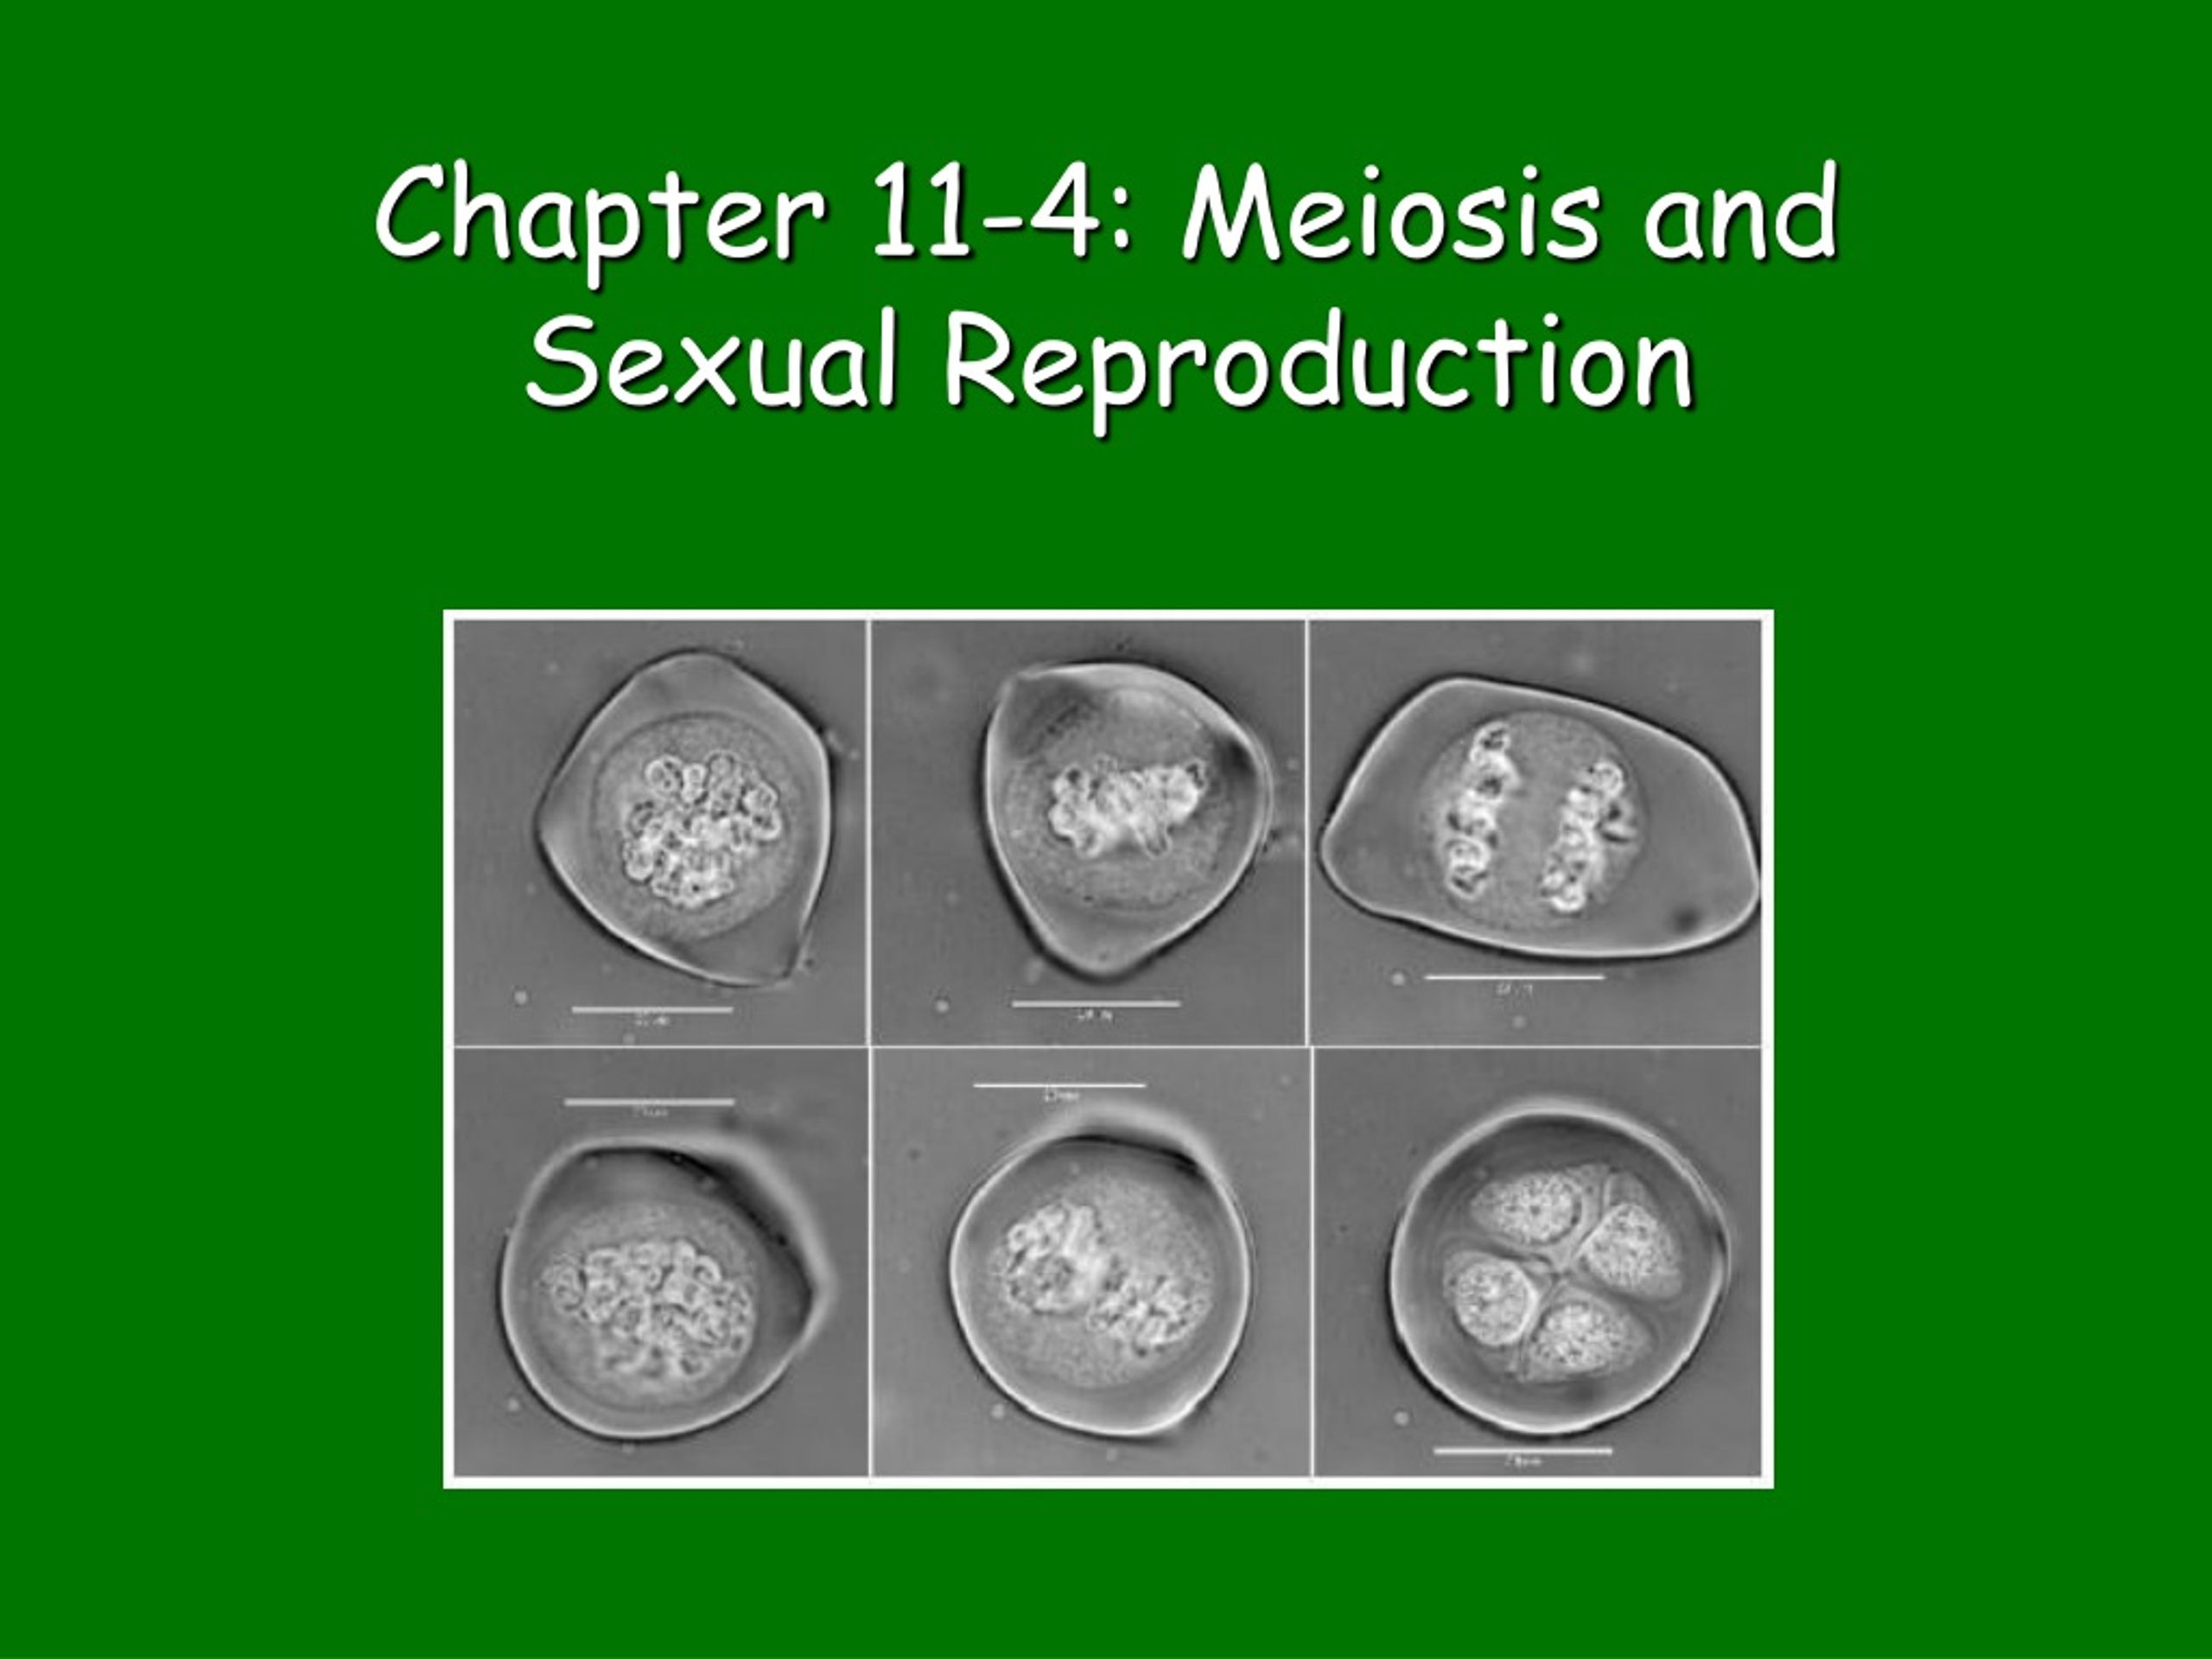 Ppt Chapter 11 4 Meiosis And Sexual Reproduction Powerpoint Presentation Id8700050 